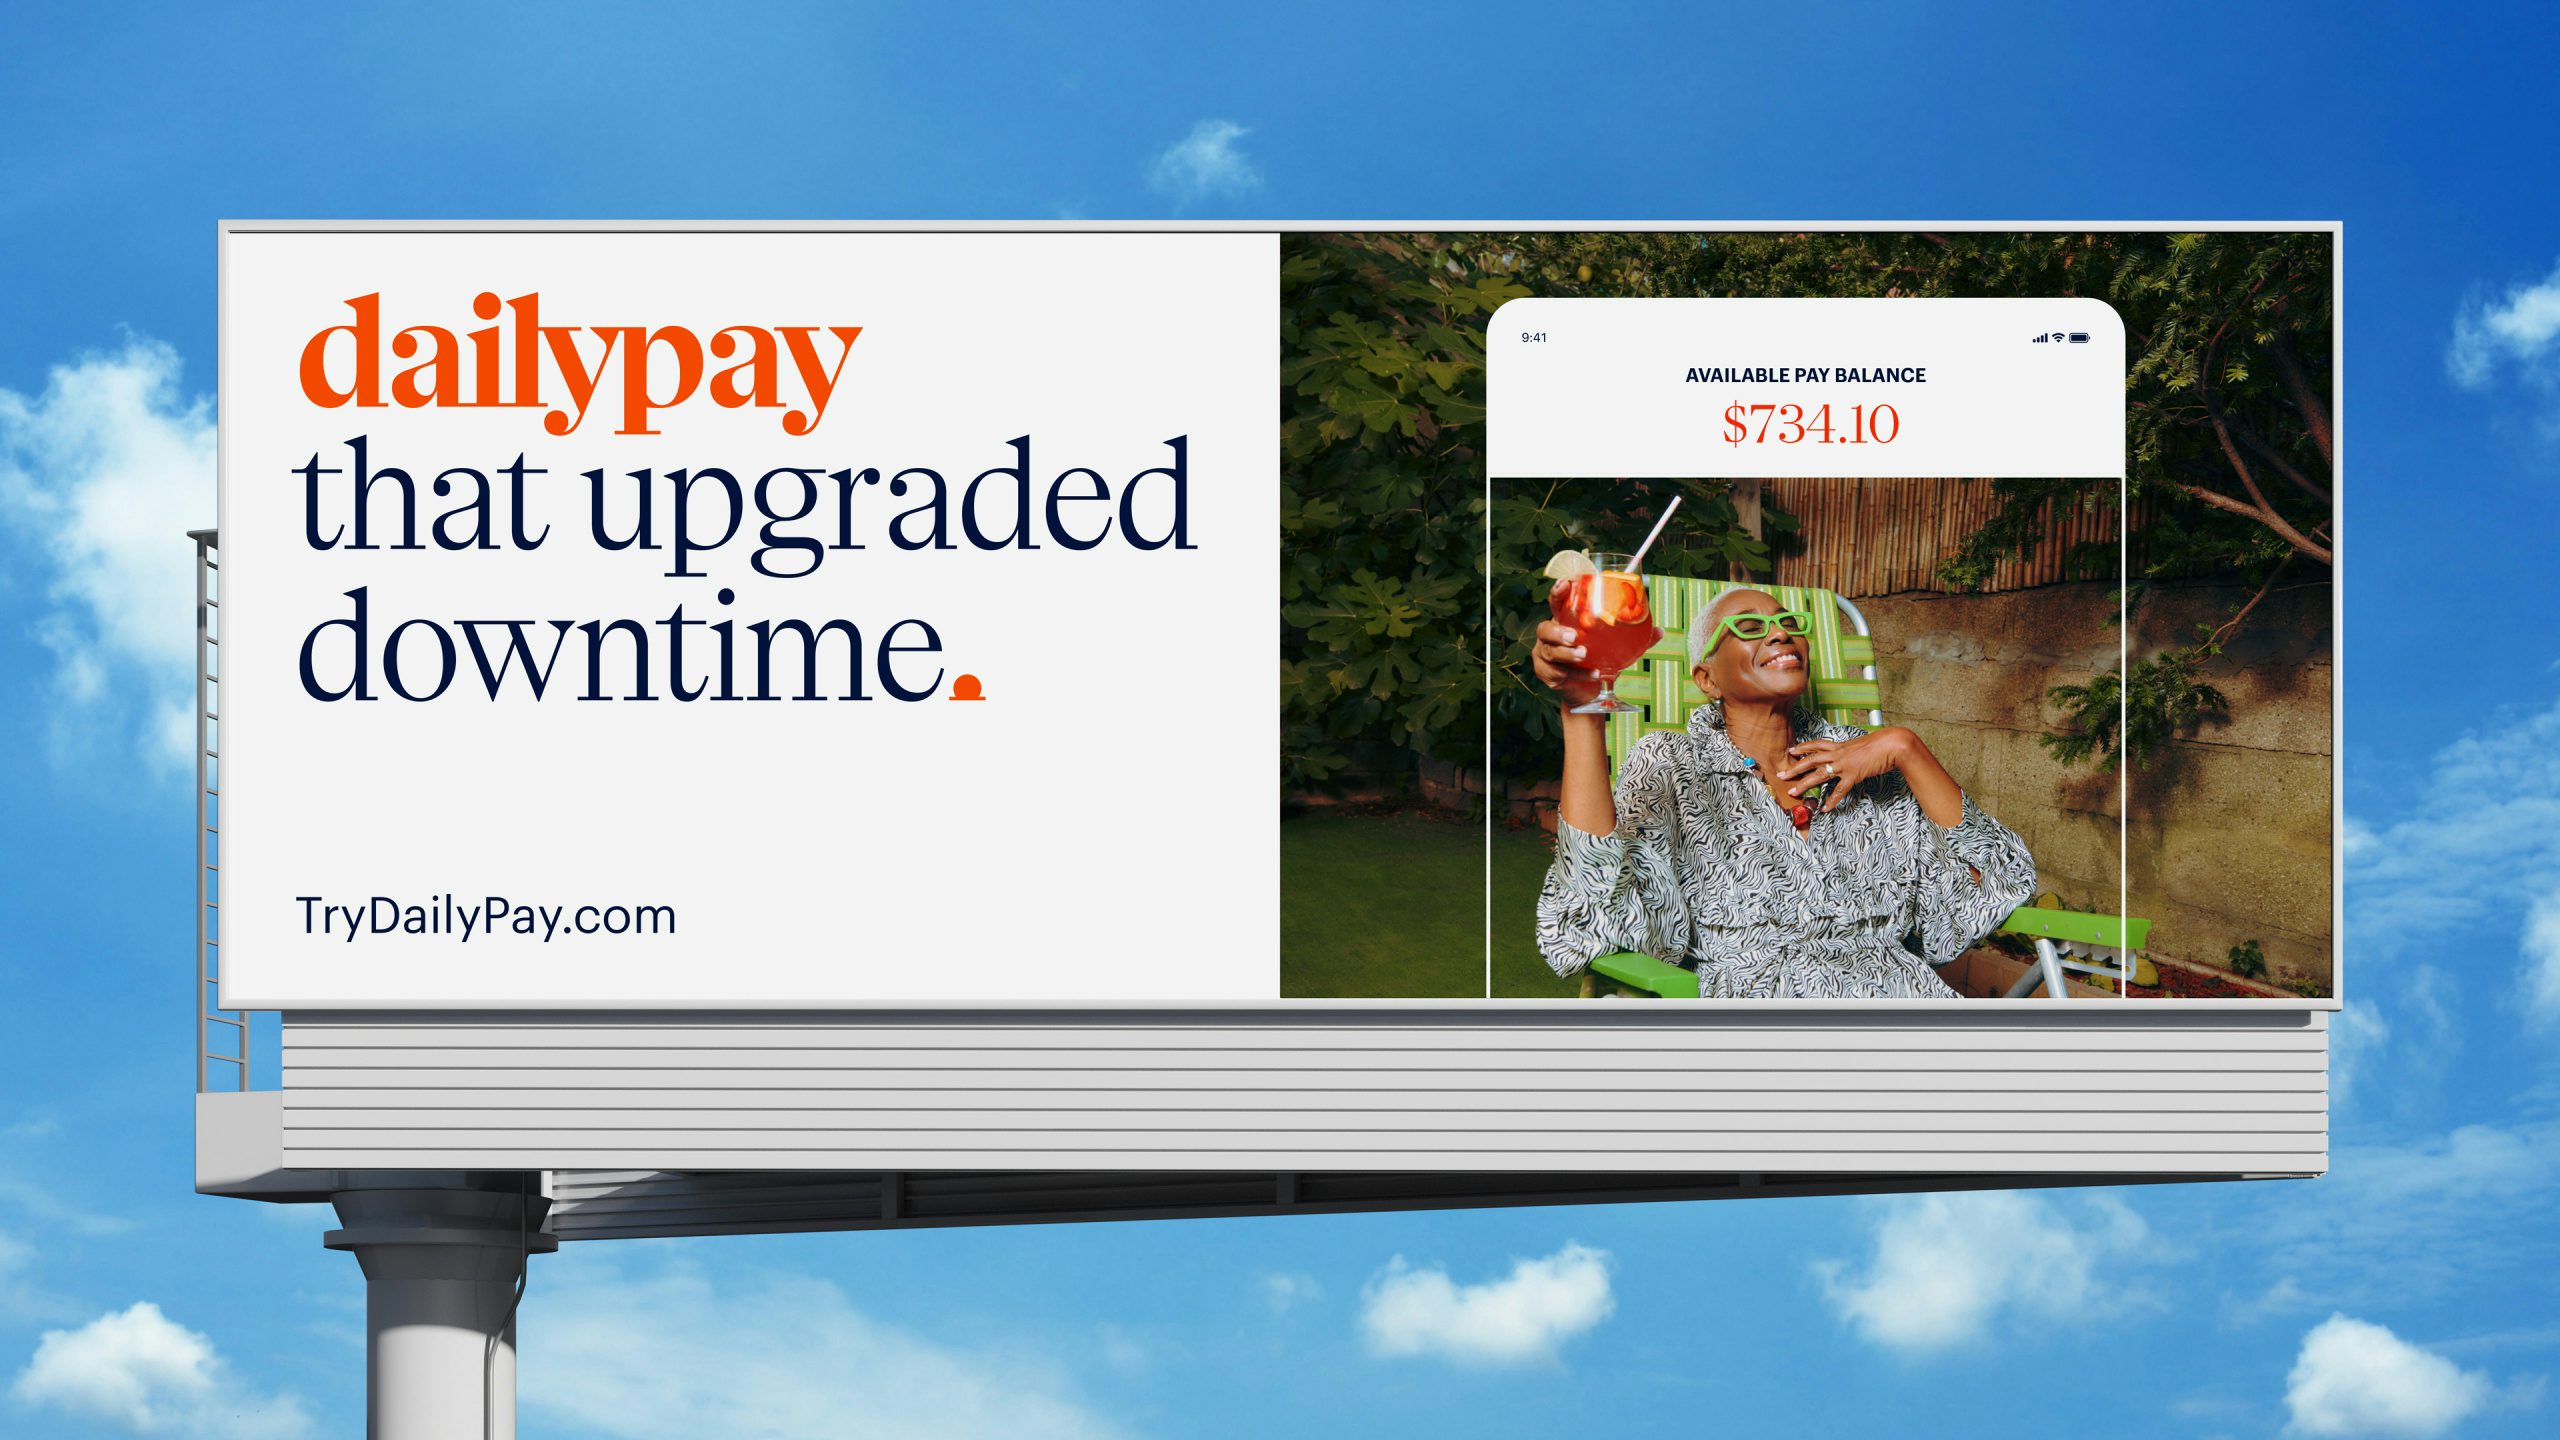 Billboard featuring DailyPay branding by Wolff Olins